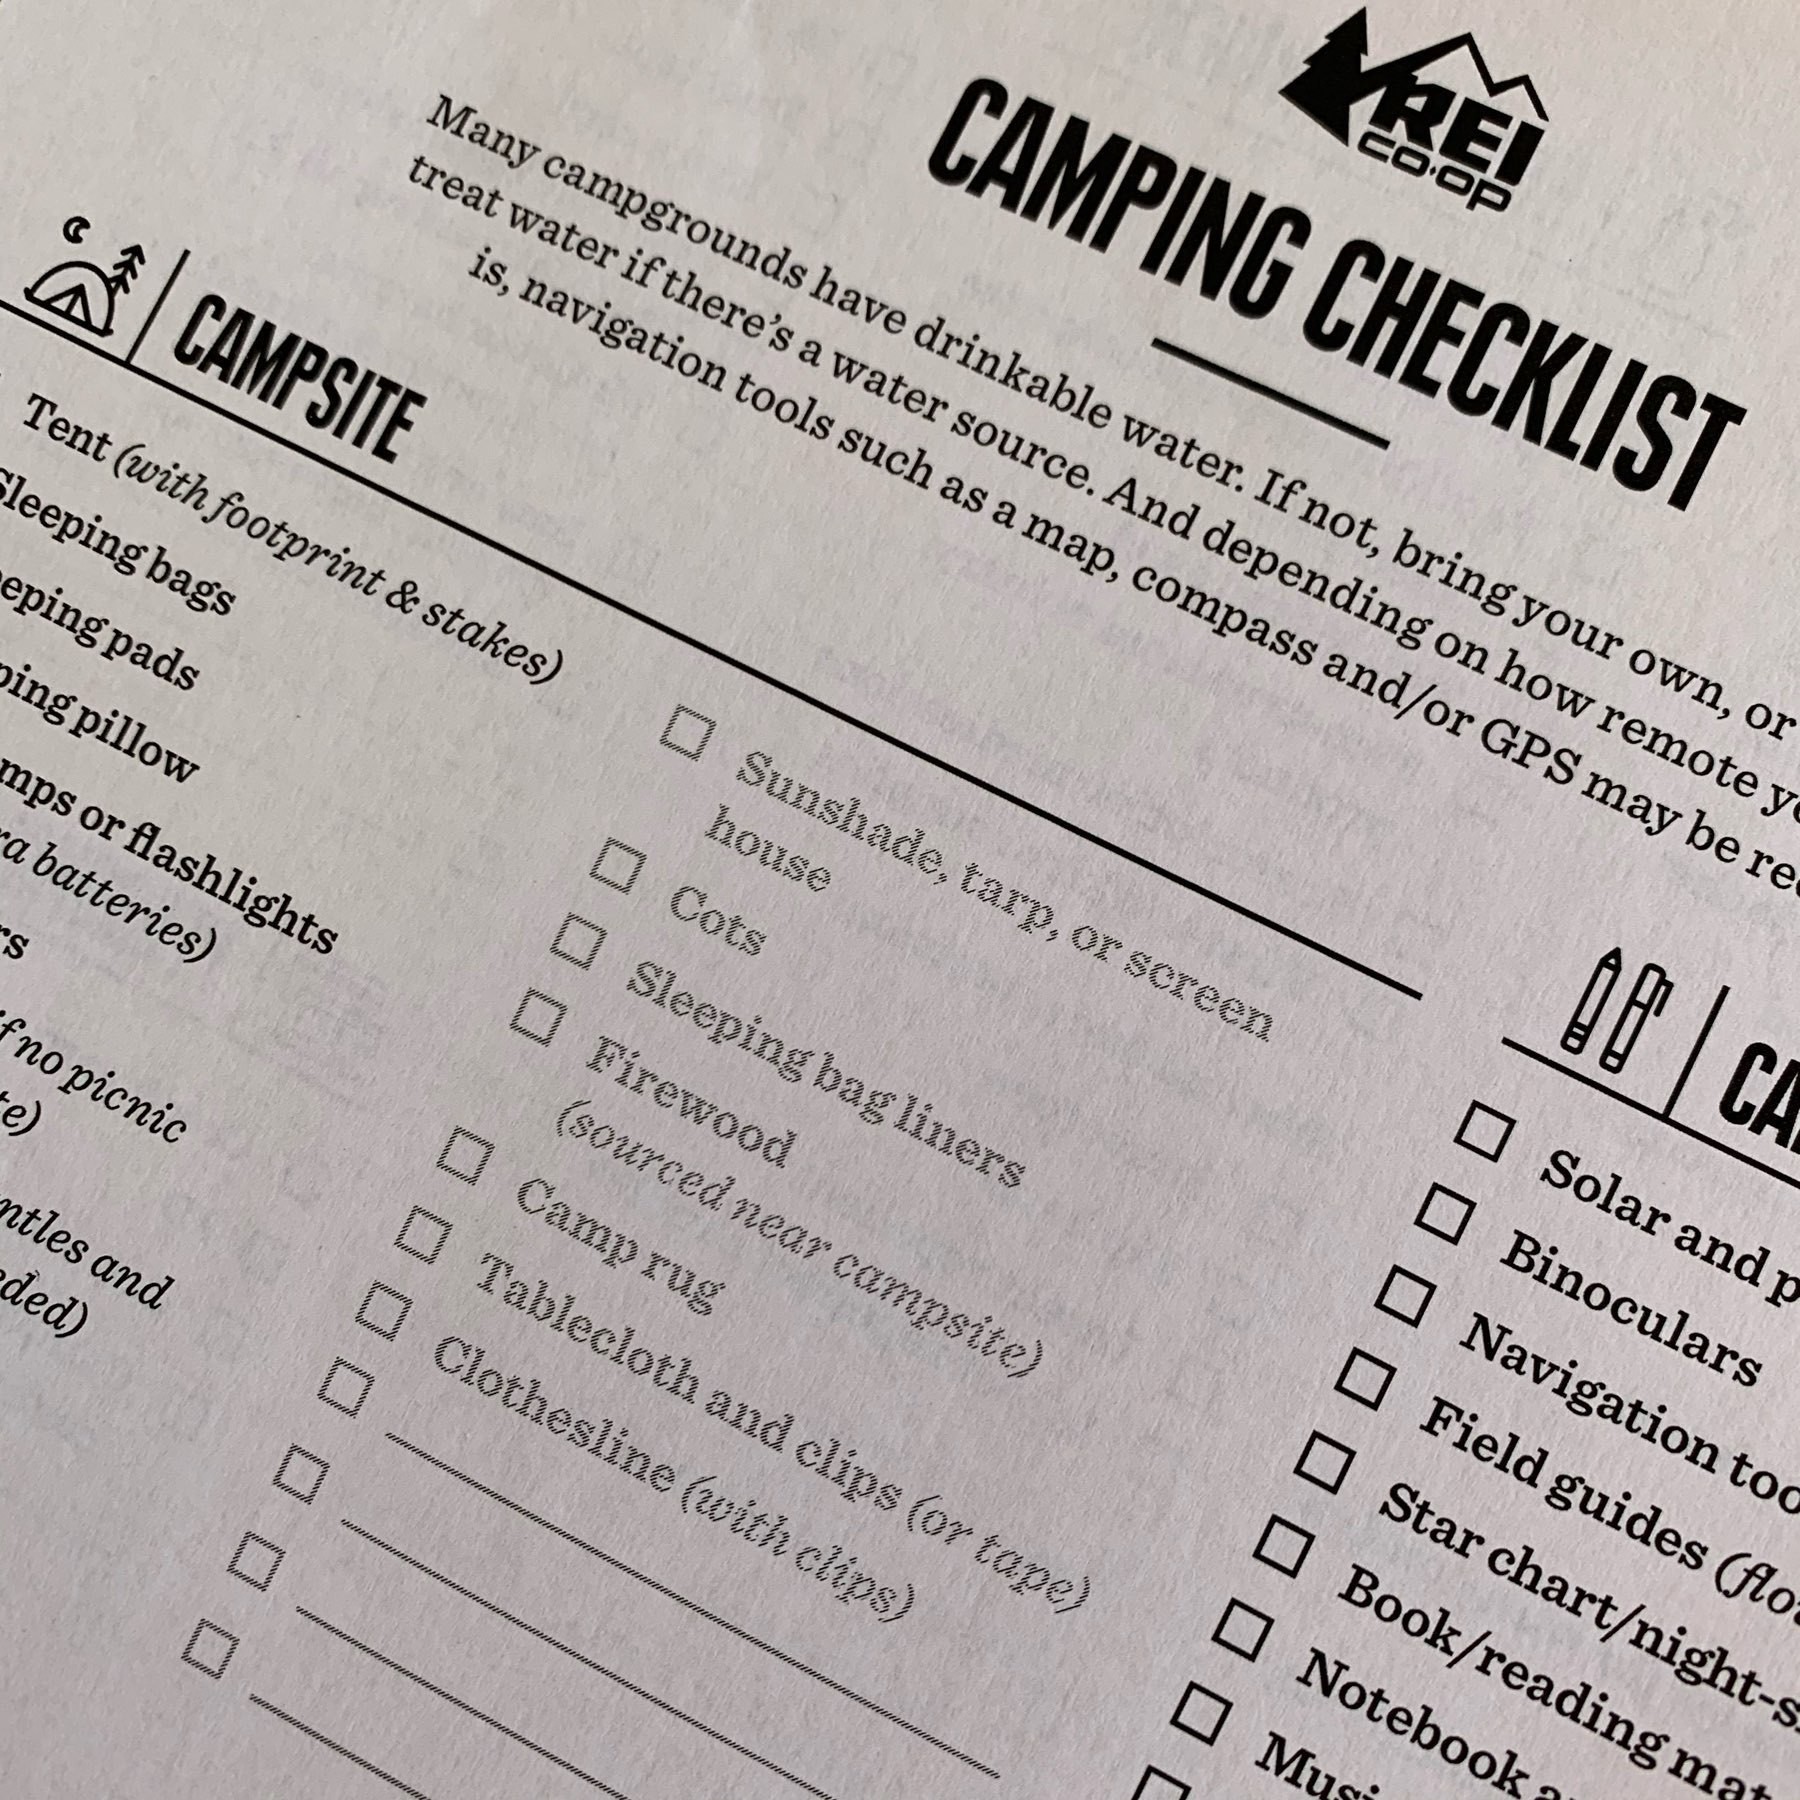 REI Co-op camping checklist